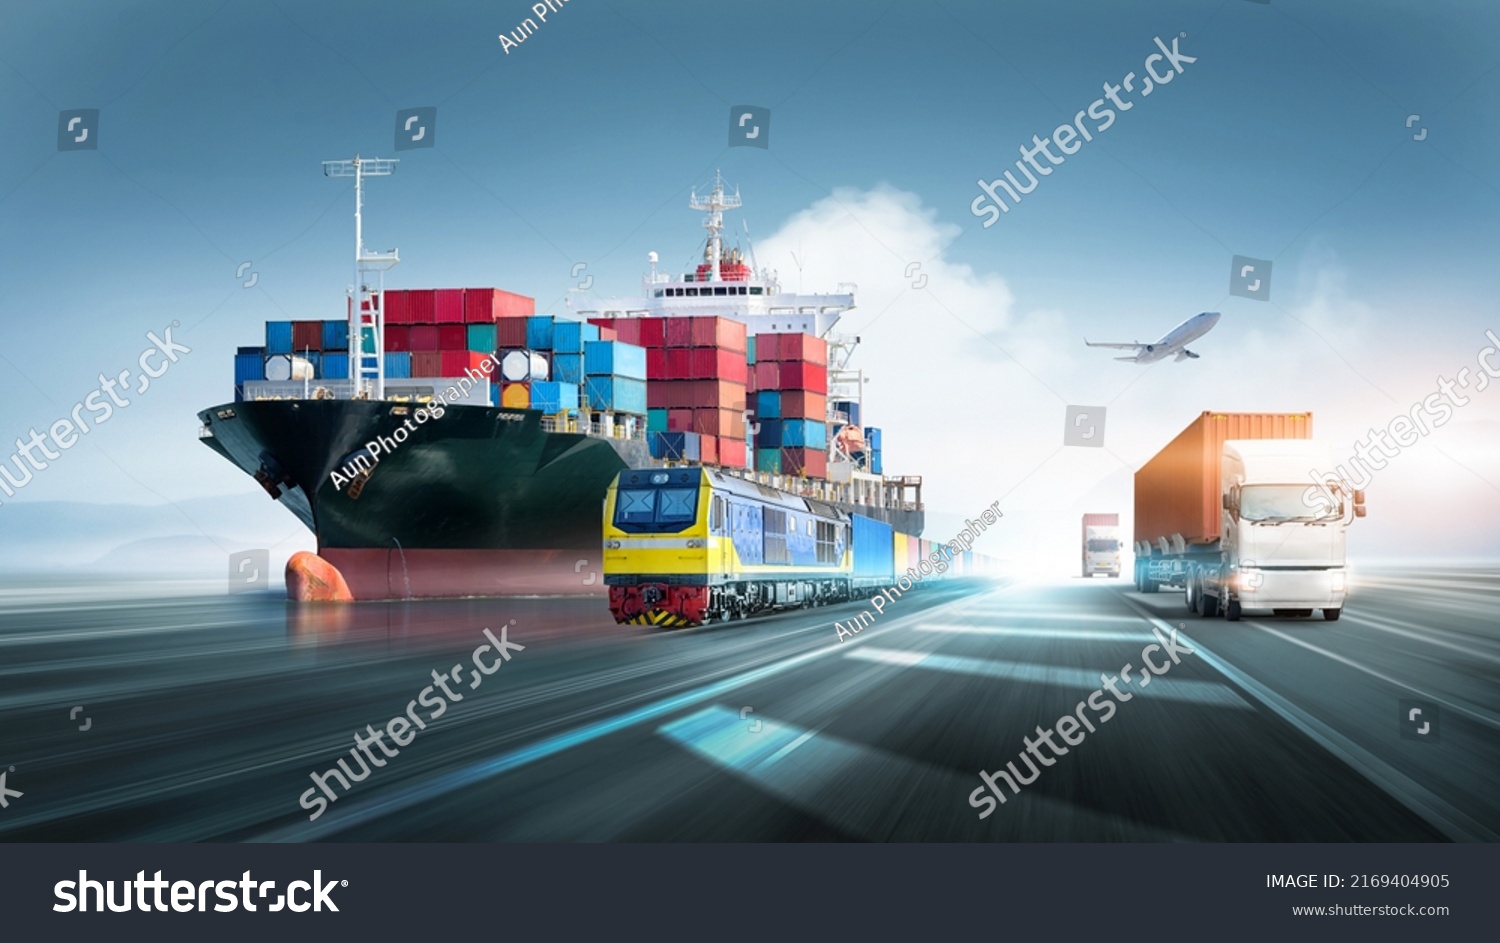 Global business logistics and transportation import export container cargo freight ship, freight train, cargo airplane, containers truck on highway with copy space, international trade concept  #2169404905